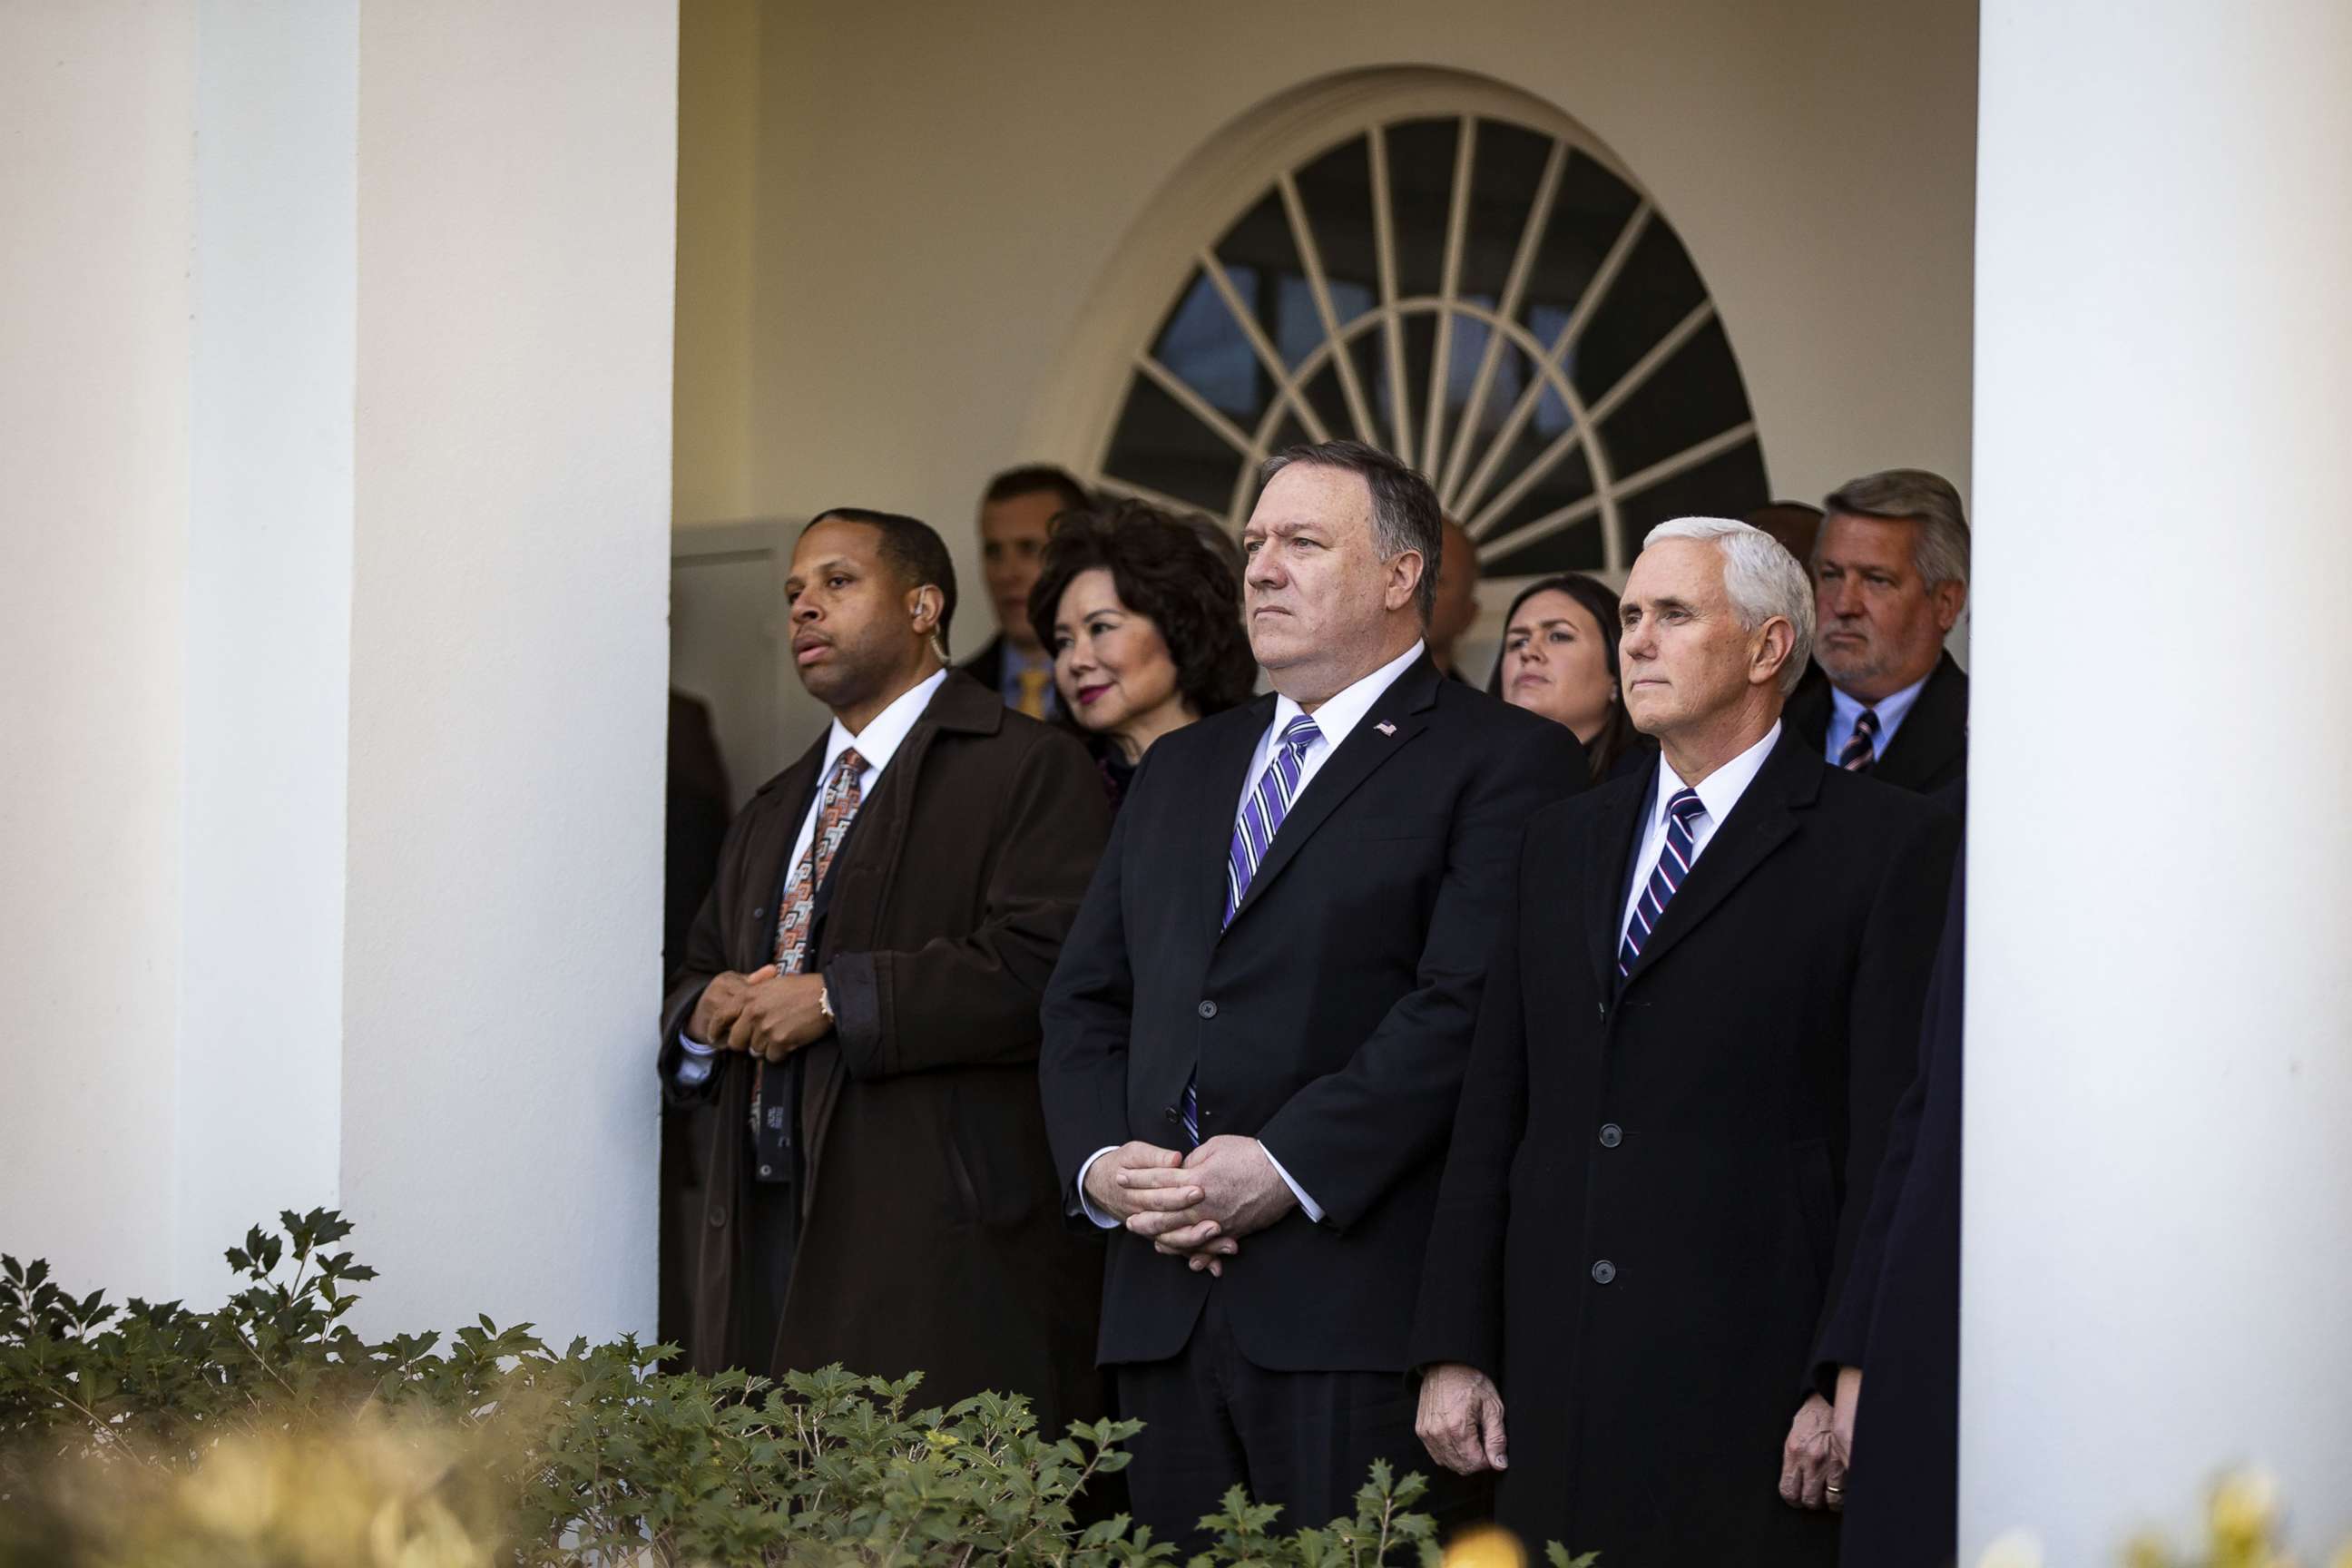 PHOTO: In this Jan. 25, 2019, file photo, Mike Pompeo and Mike Pence attend an event in the Rose Garden at the White House in Washington, D.C.